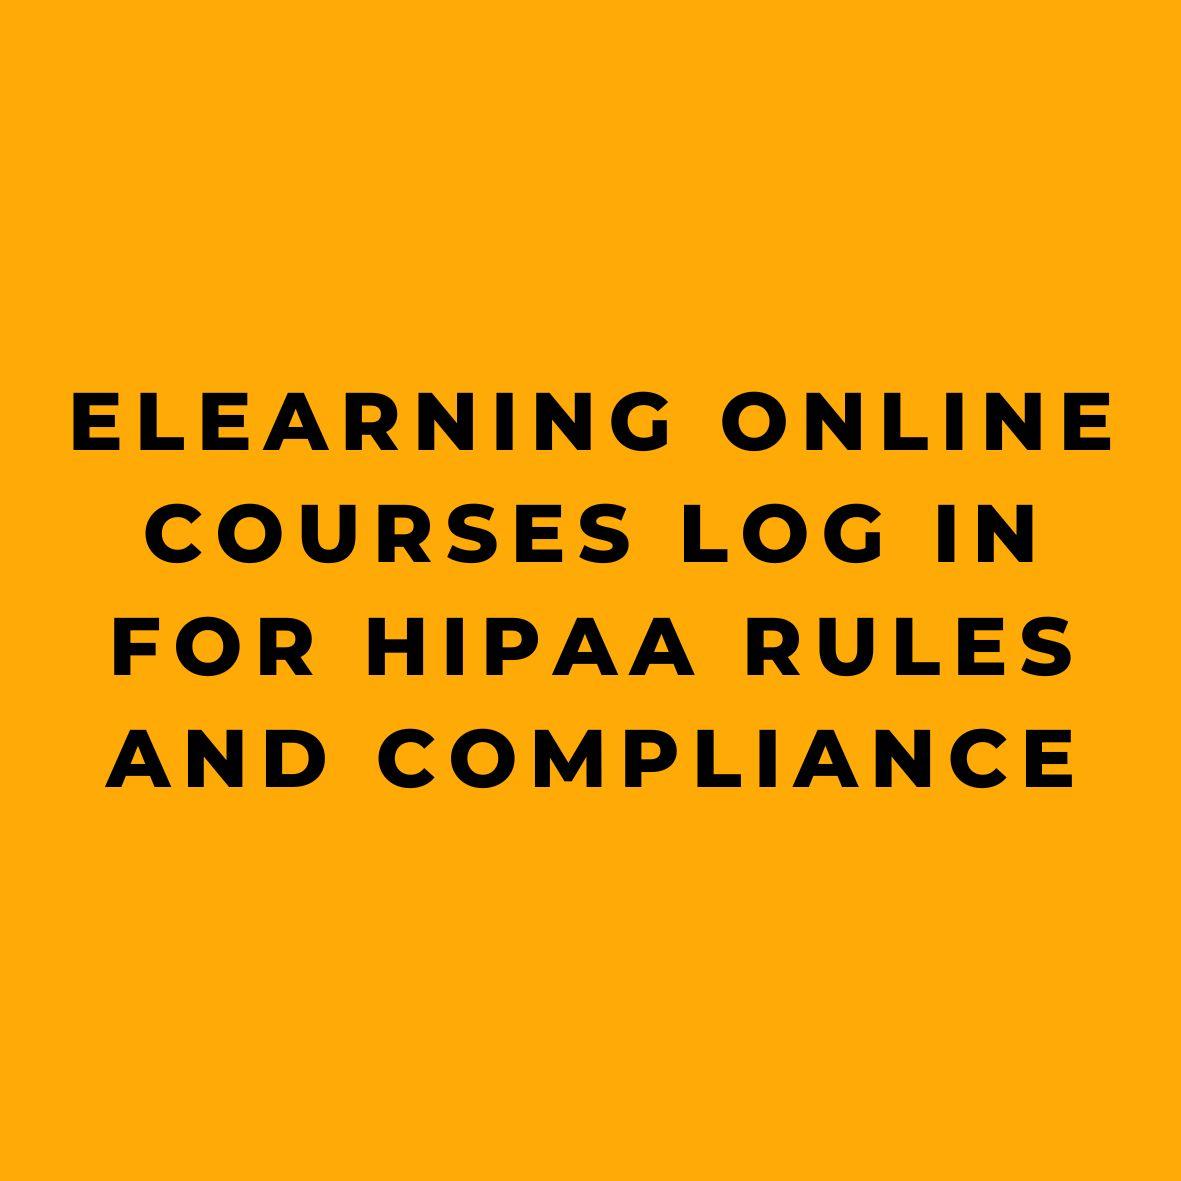 eLearning Online Courses Log In for HIPAA Rules and Compliance